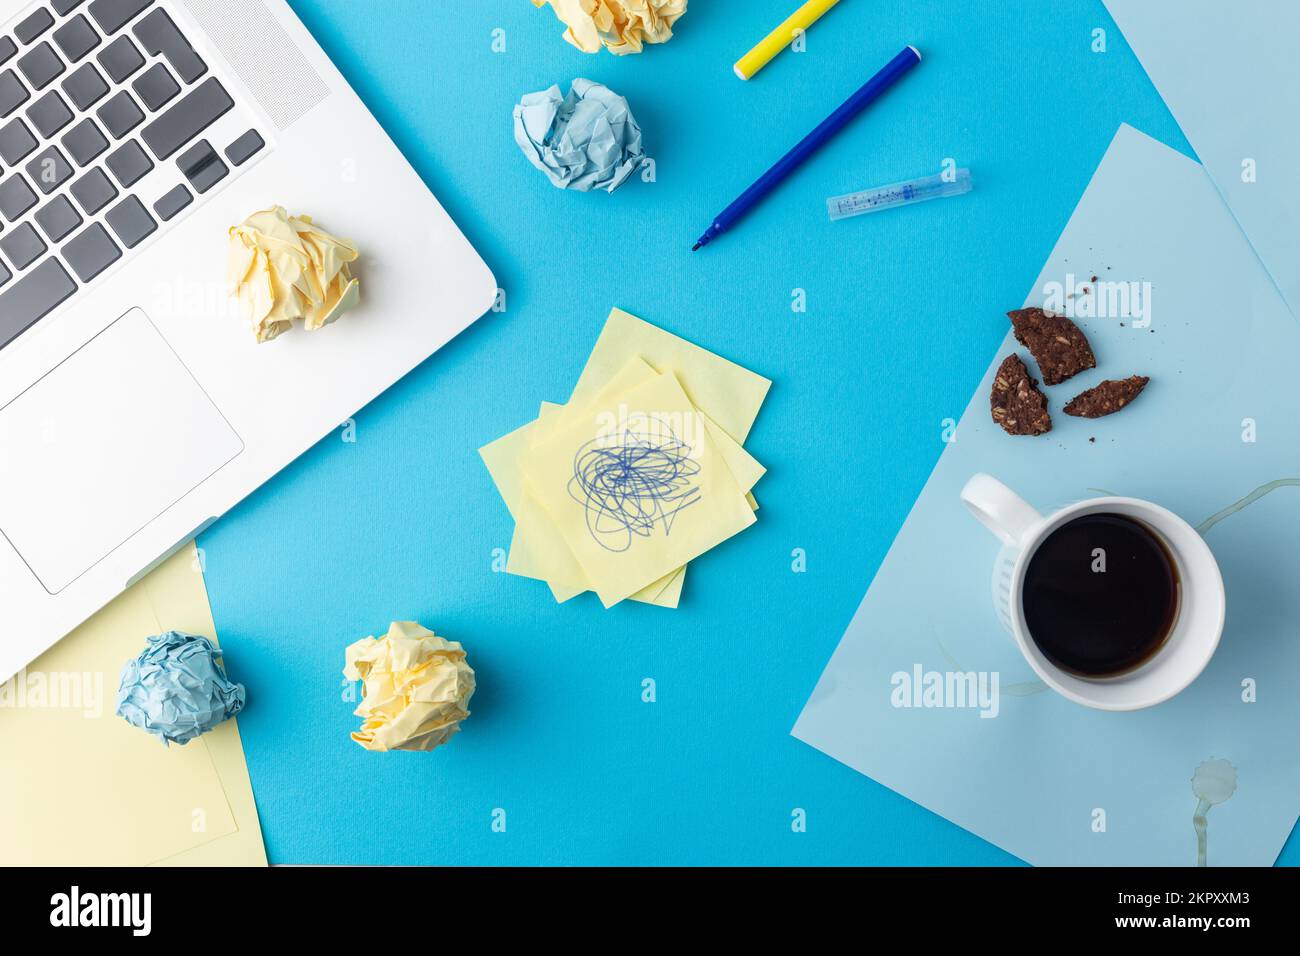 Concept of messy and chaos office desk blue and yellow Stock Photo